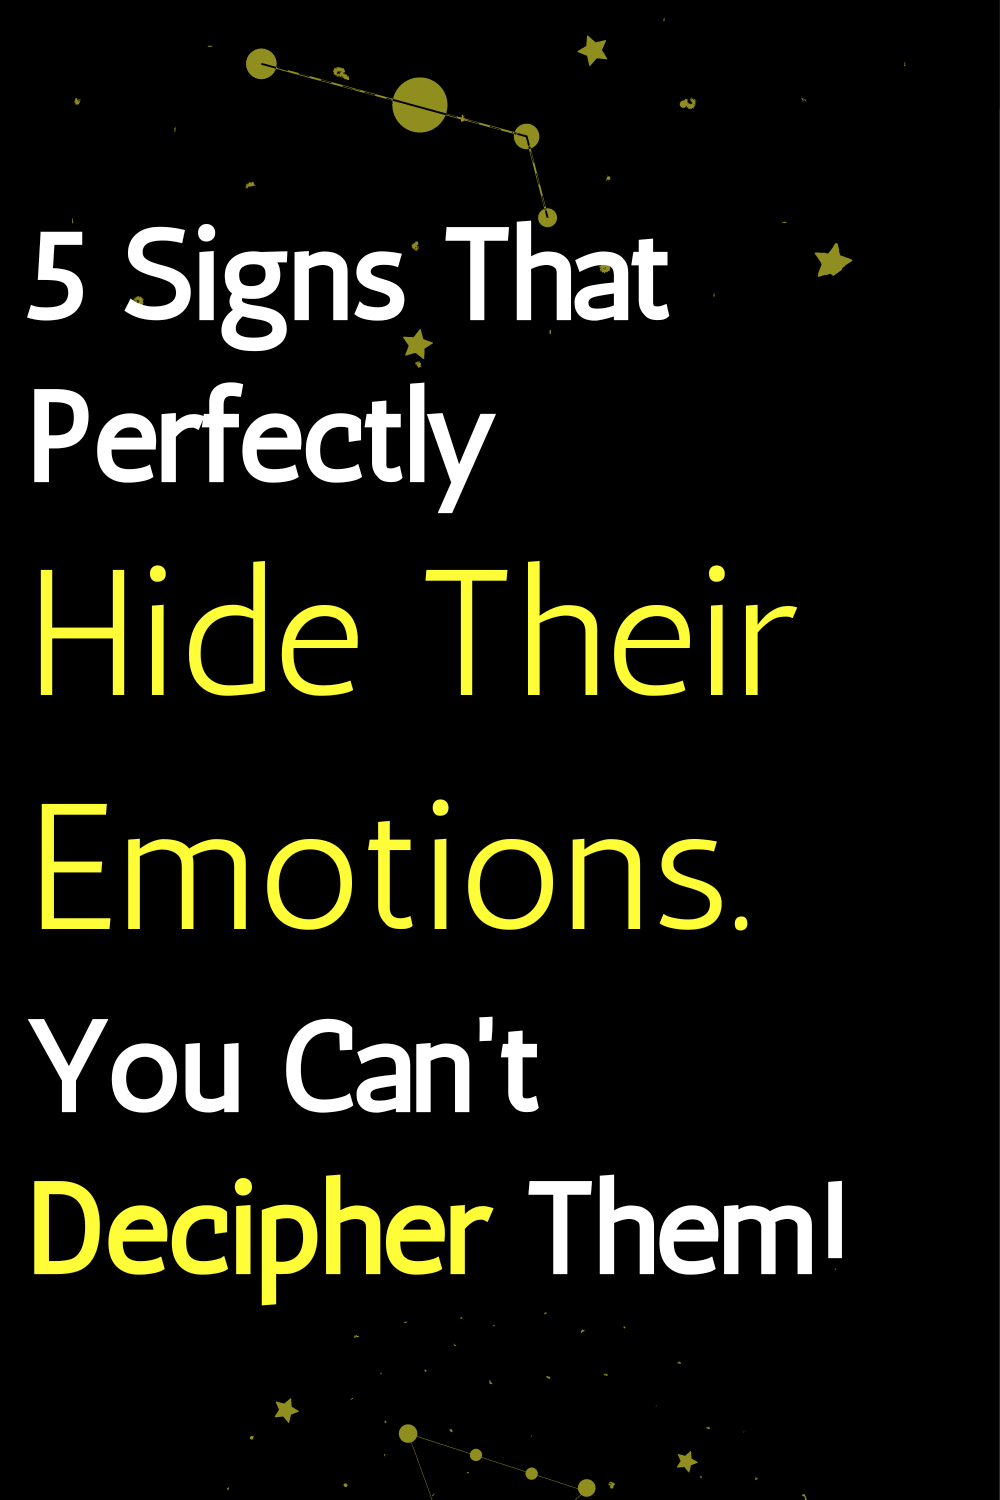 5 Signs That Perfectly Hide Their Emotions. You Can't Decipher Them!